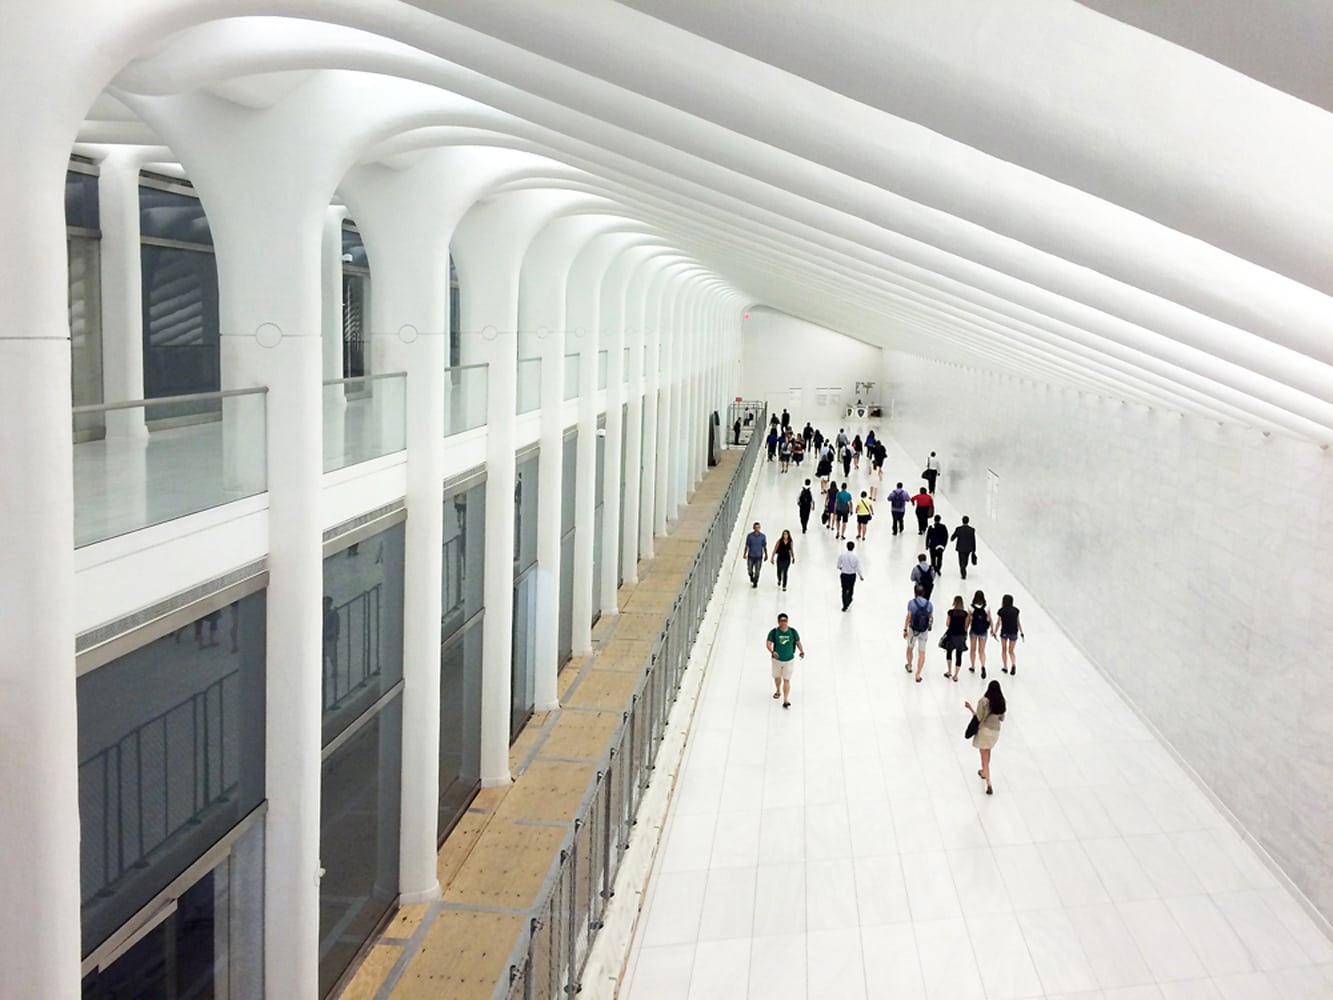 Photo of a cloud of people walking away down a futuristic white hallway in a NYC train station mall Architectural Photography